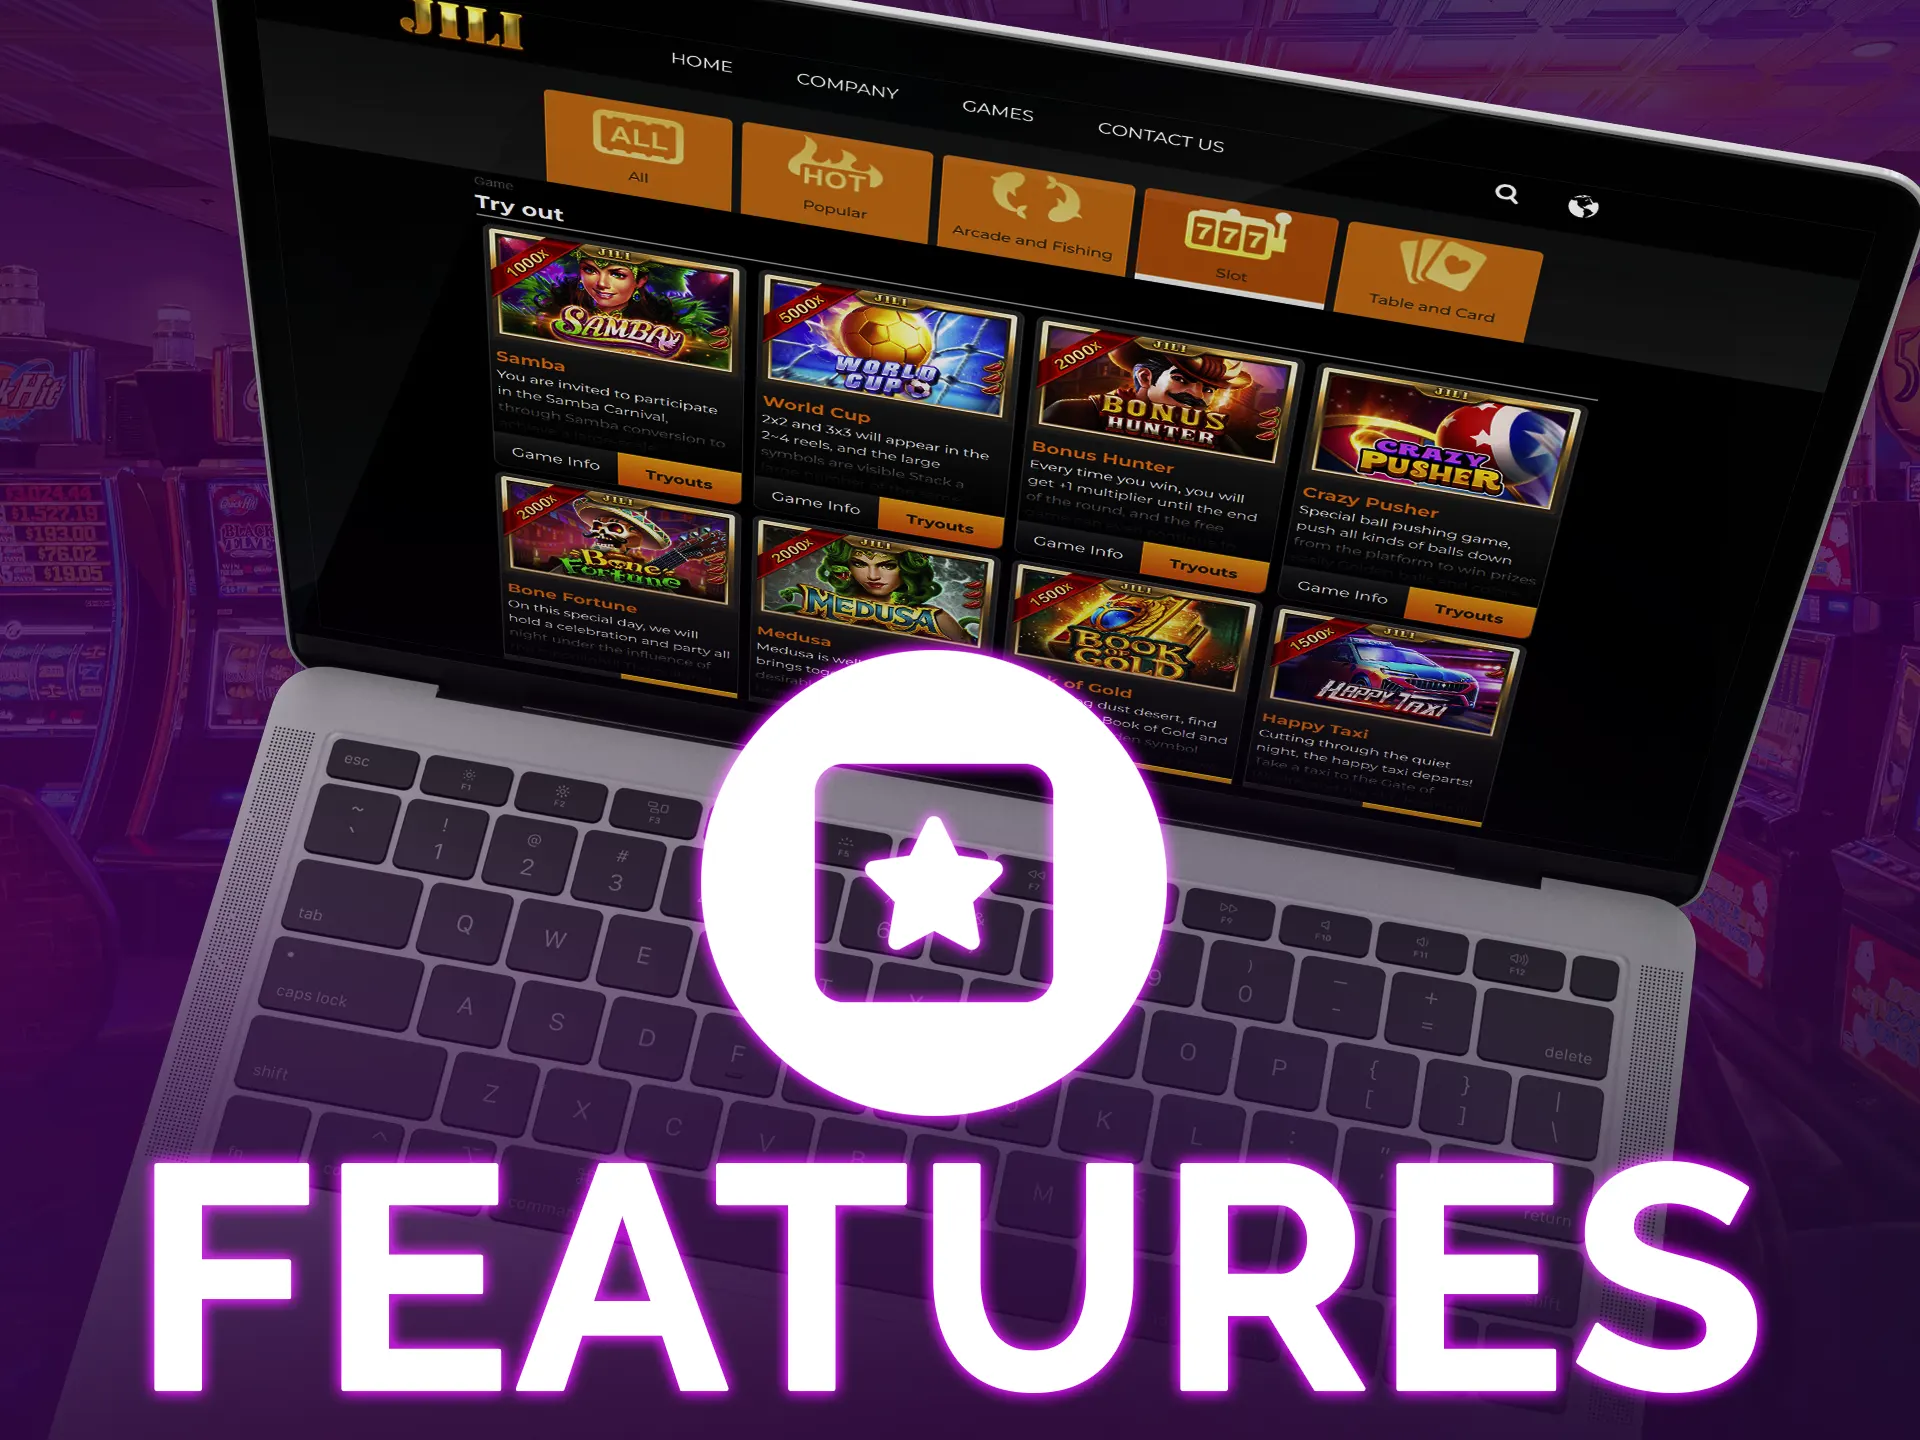 Jili slots offer diverse options, including free spins, multipliers, and unique bonuses.